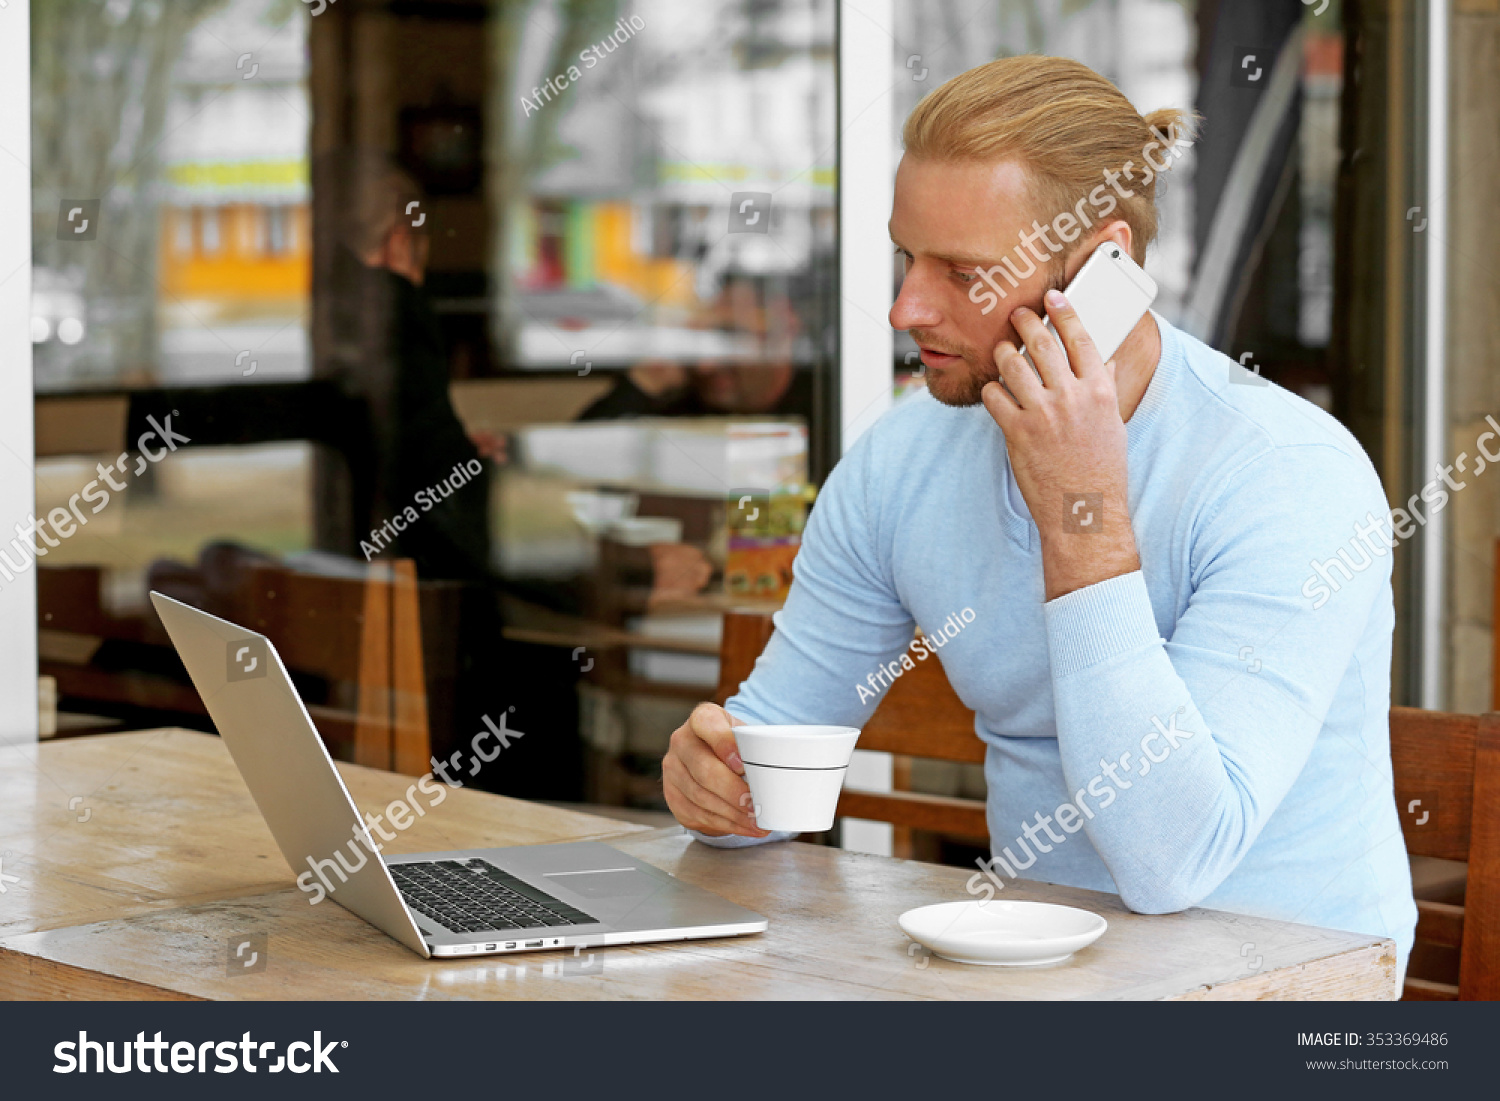 Young attractive businessman having lunch and working in a cafe #353369486